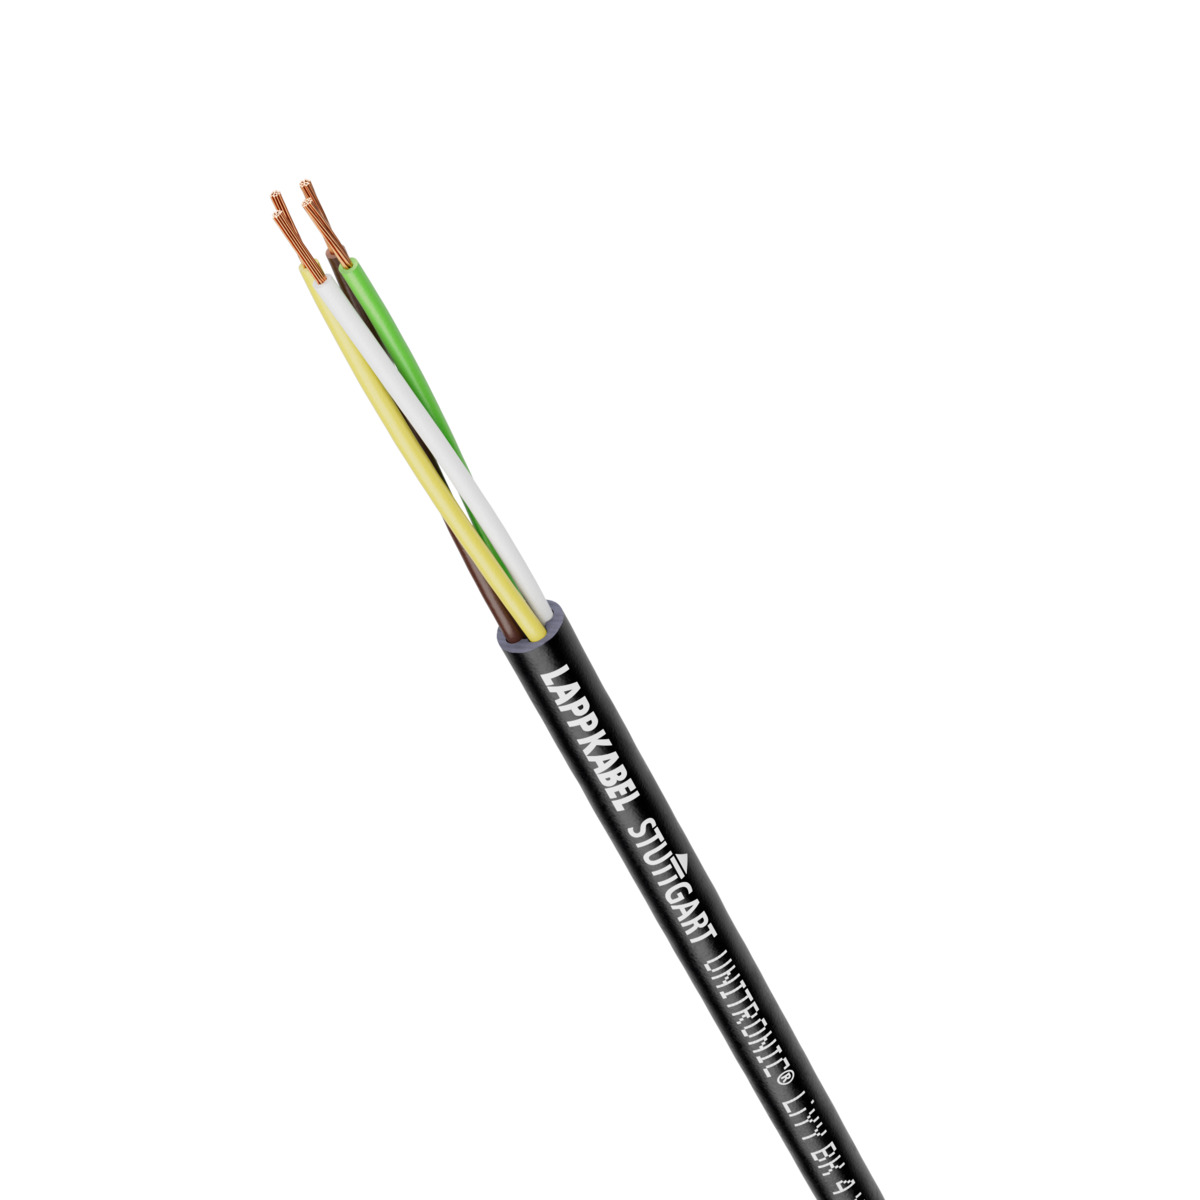 UNITRONIC® LiYY BK low frequency data transmission cable